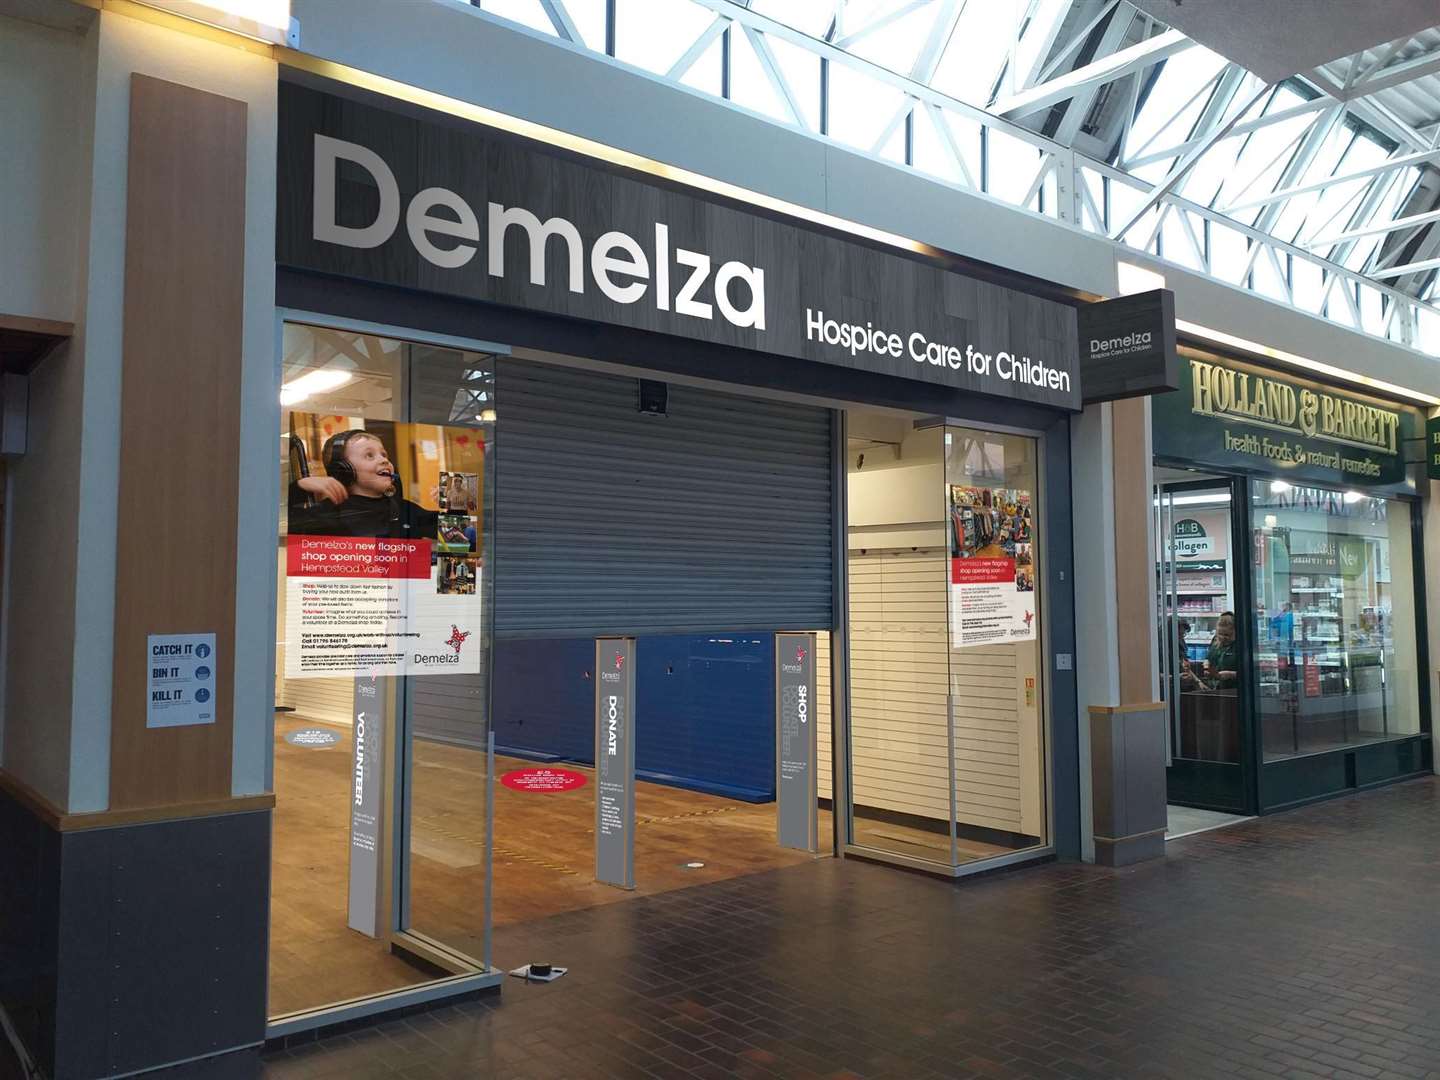 Demelza was first charity shop at Hempstead Valley